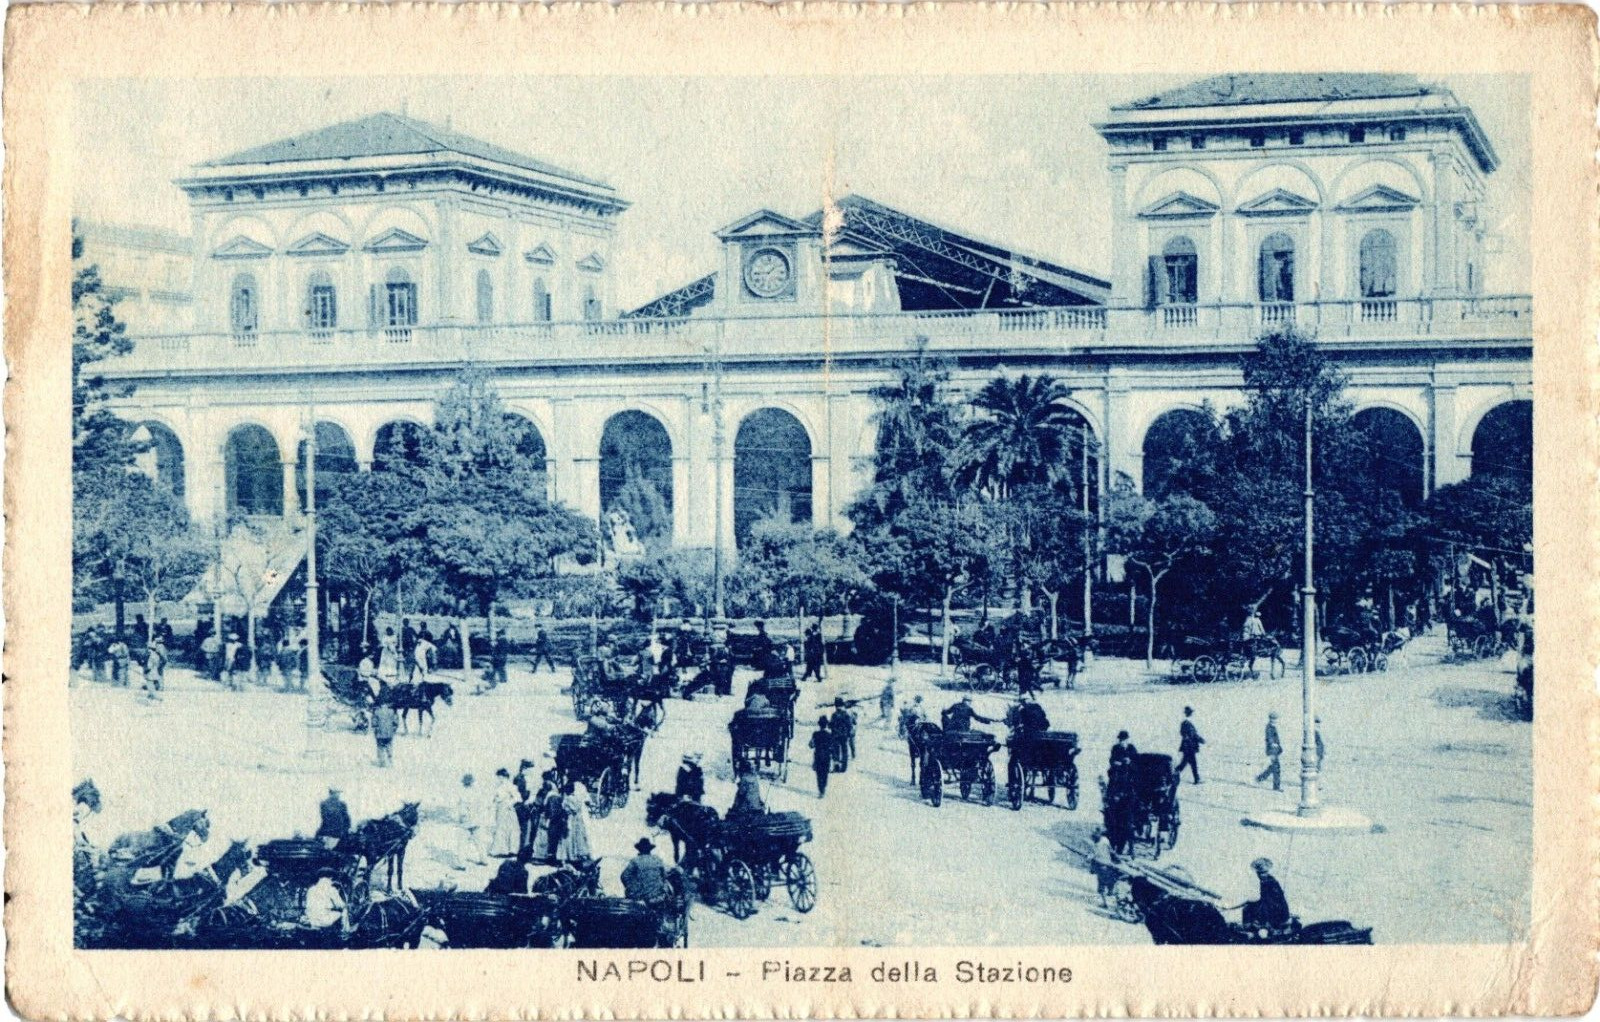 Railway Station Italy Napoli Centrale Built 1860s Torn Down 1960s Postcard